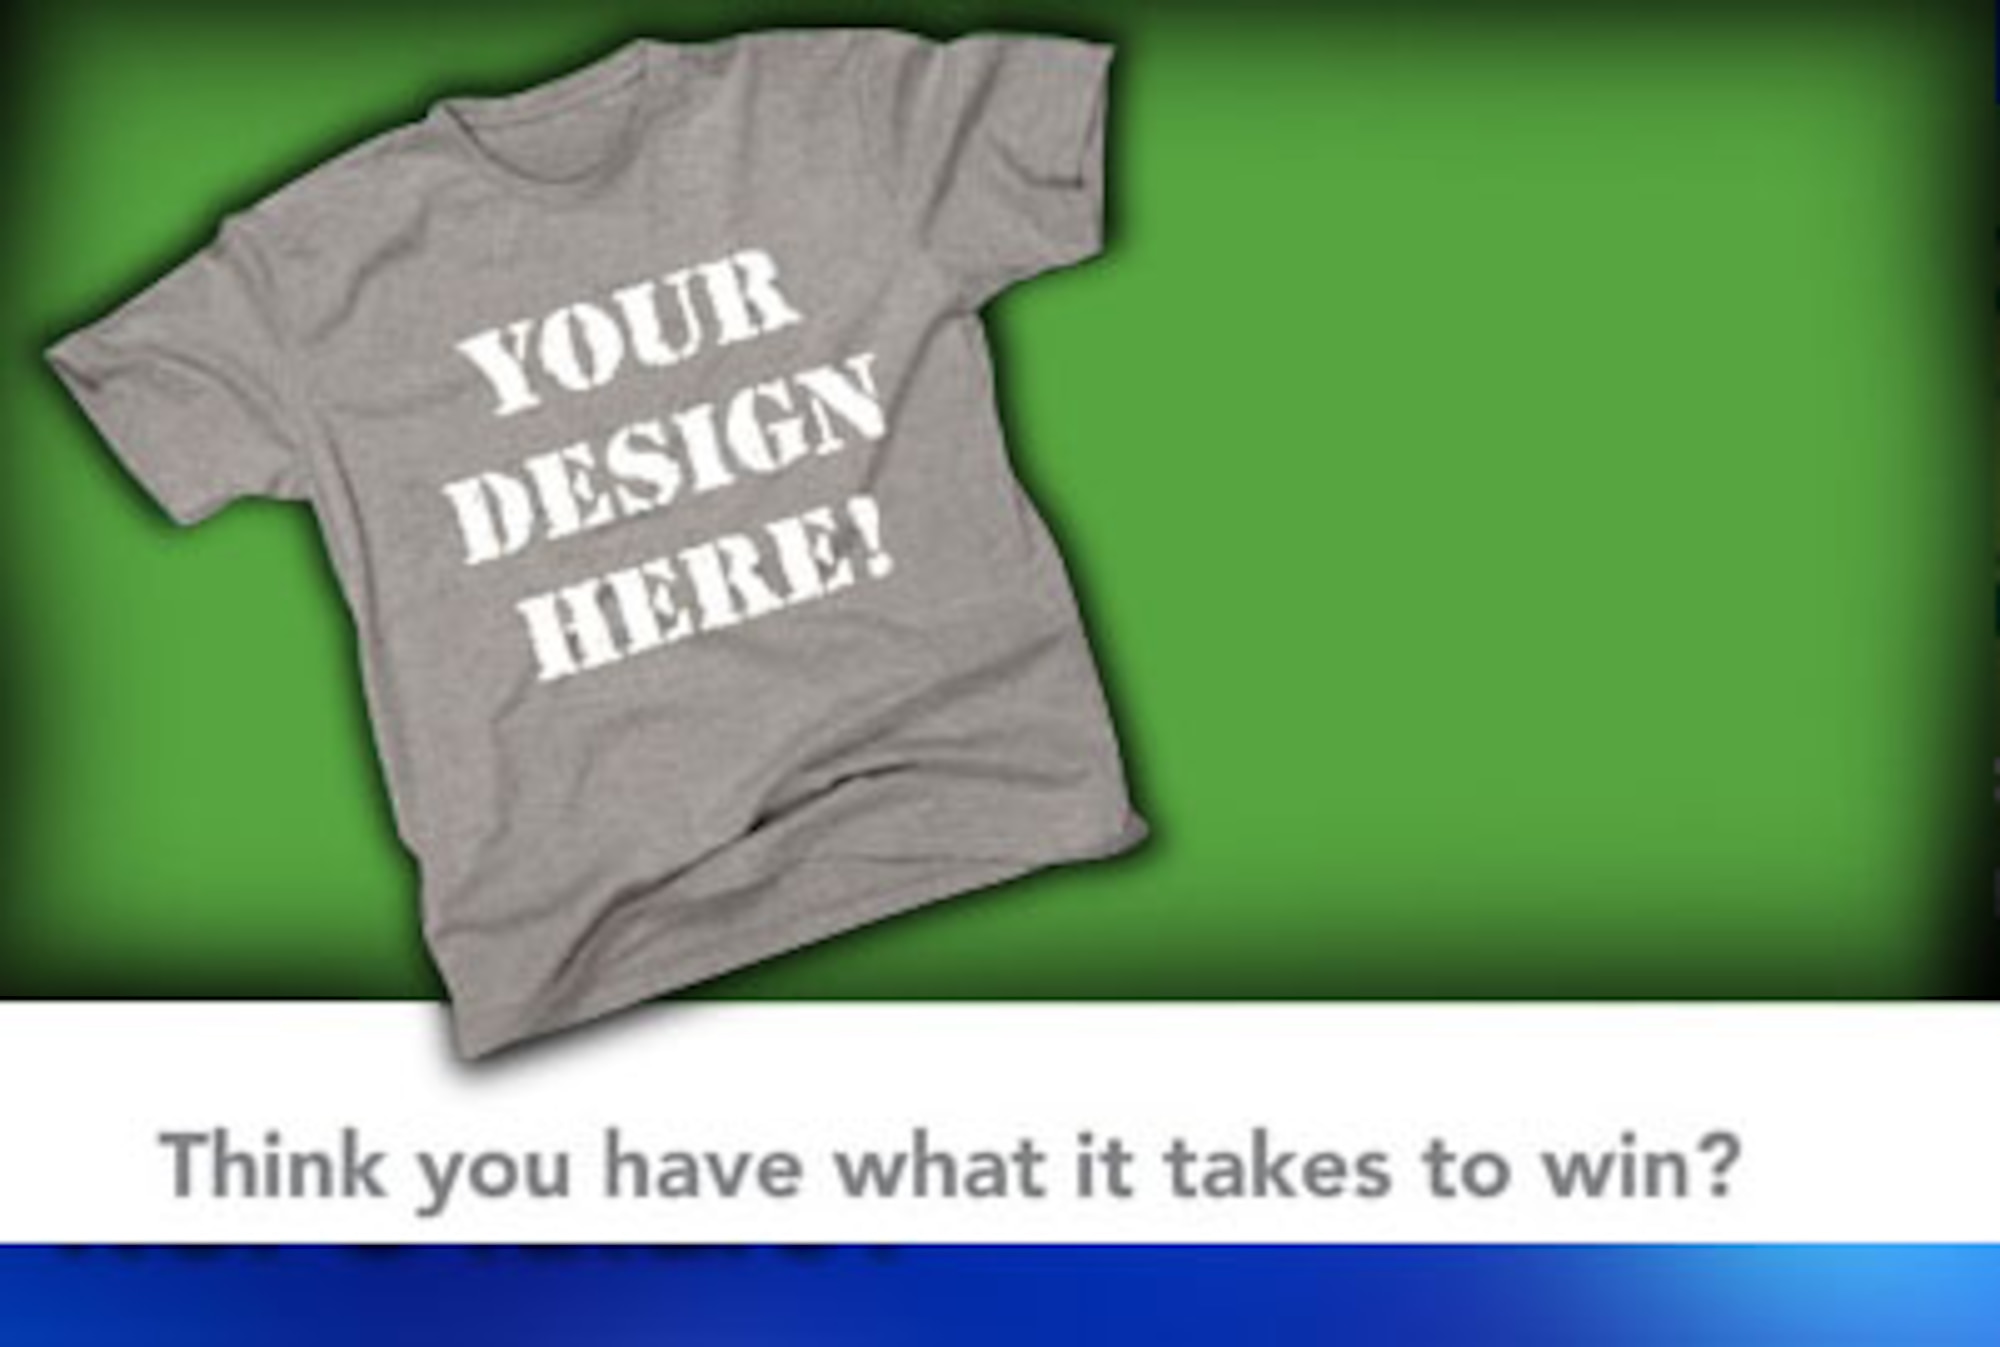 Air Force Services Agency officials are promoting a T-shirt design competition now through Dec. 20, as part of the Year of the Air Force Family.